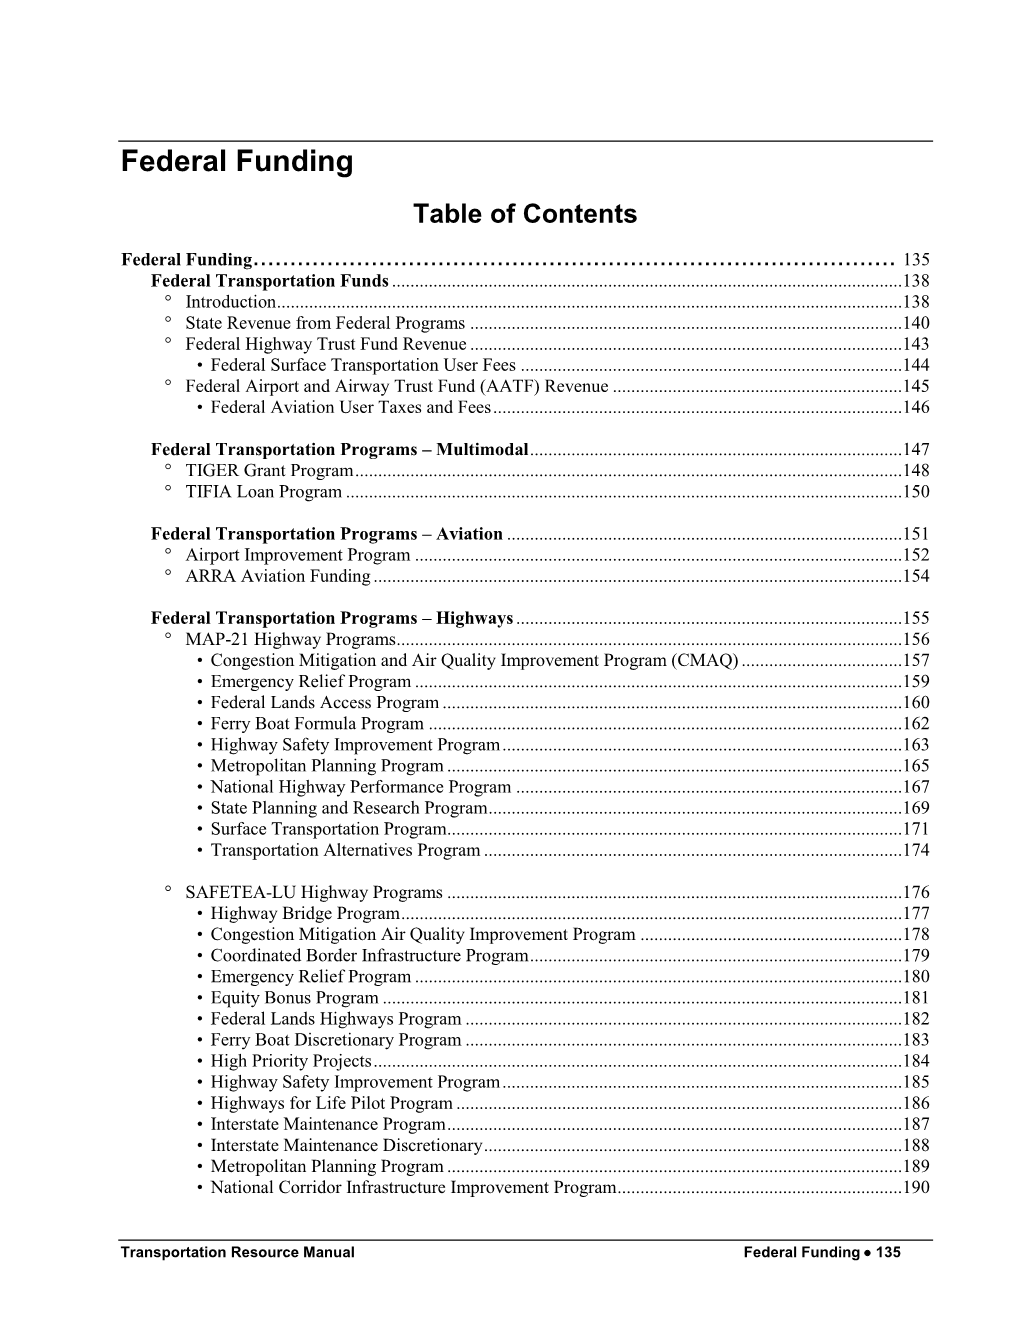 Federal Funding Table of Contents